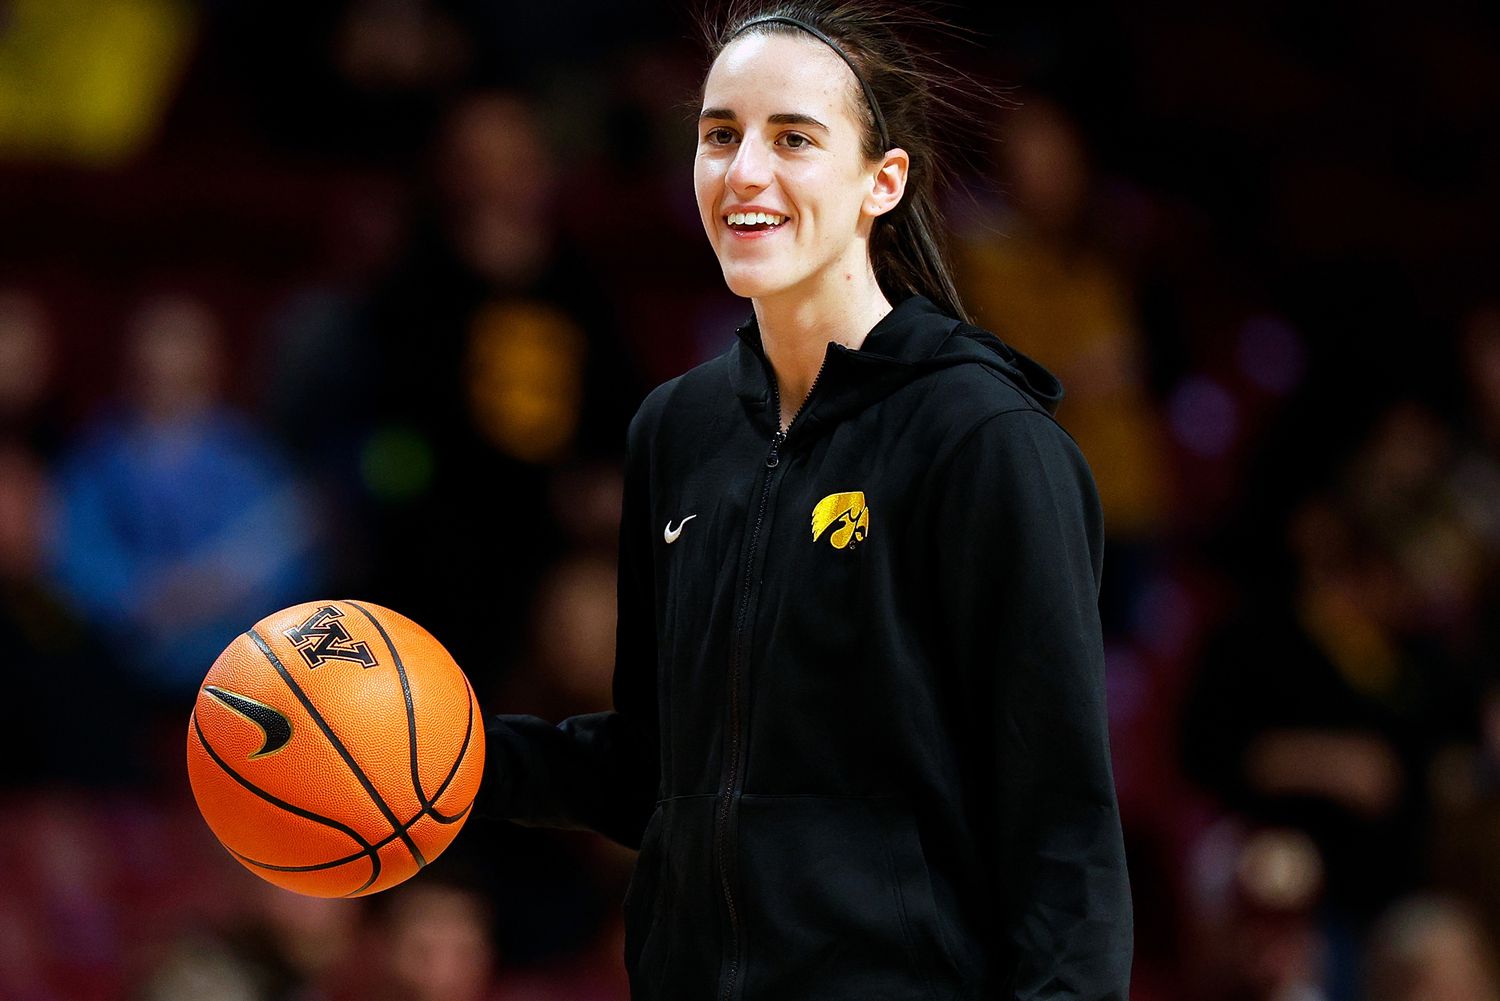 Caitlin Clark of the Iowa Hawkeyes smiles as she warms up prior to the start of the game against the Minnesota Golden Gophers at Williams Arena on February 28, 2024